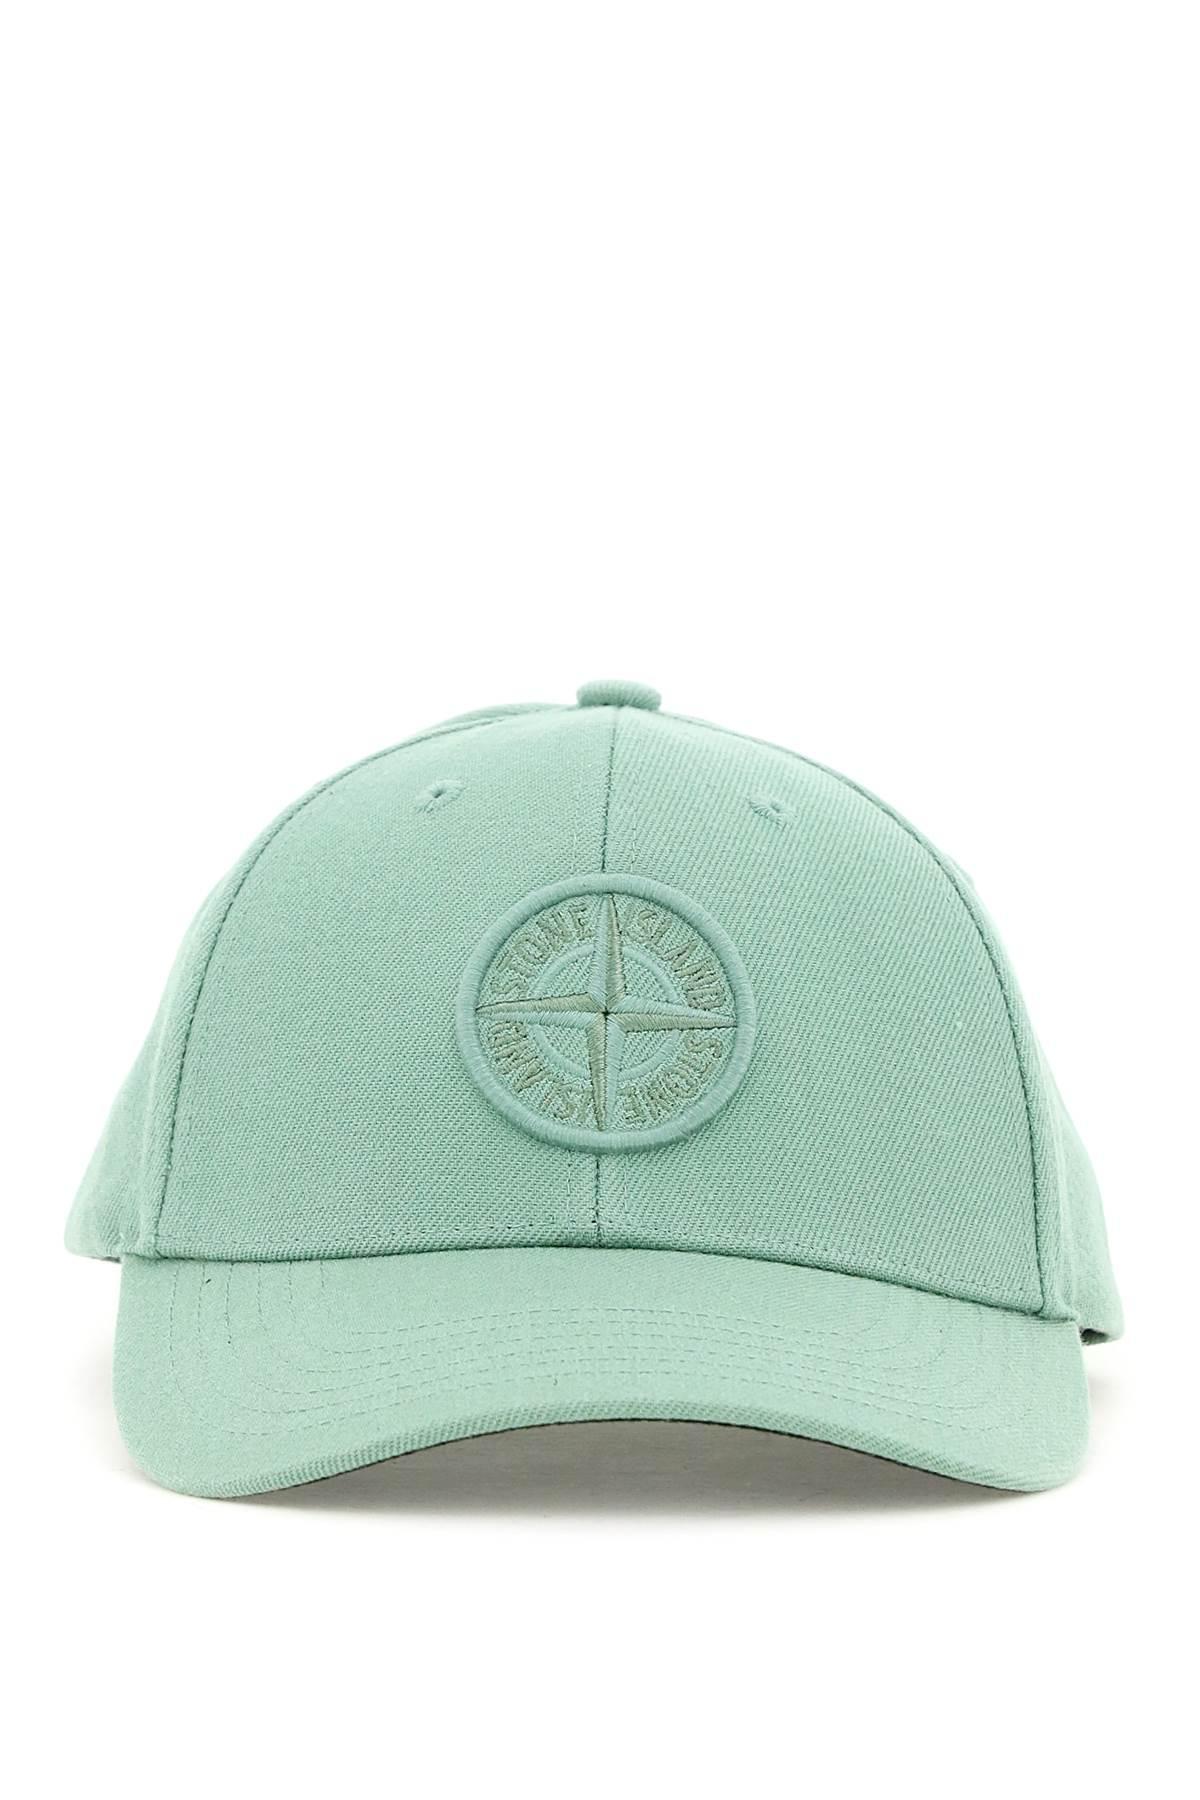 Stone Island Cotton Logoed Baseball Cap in Green for Men - Save 1% | Lyst  Canada